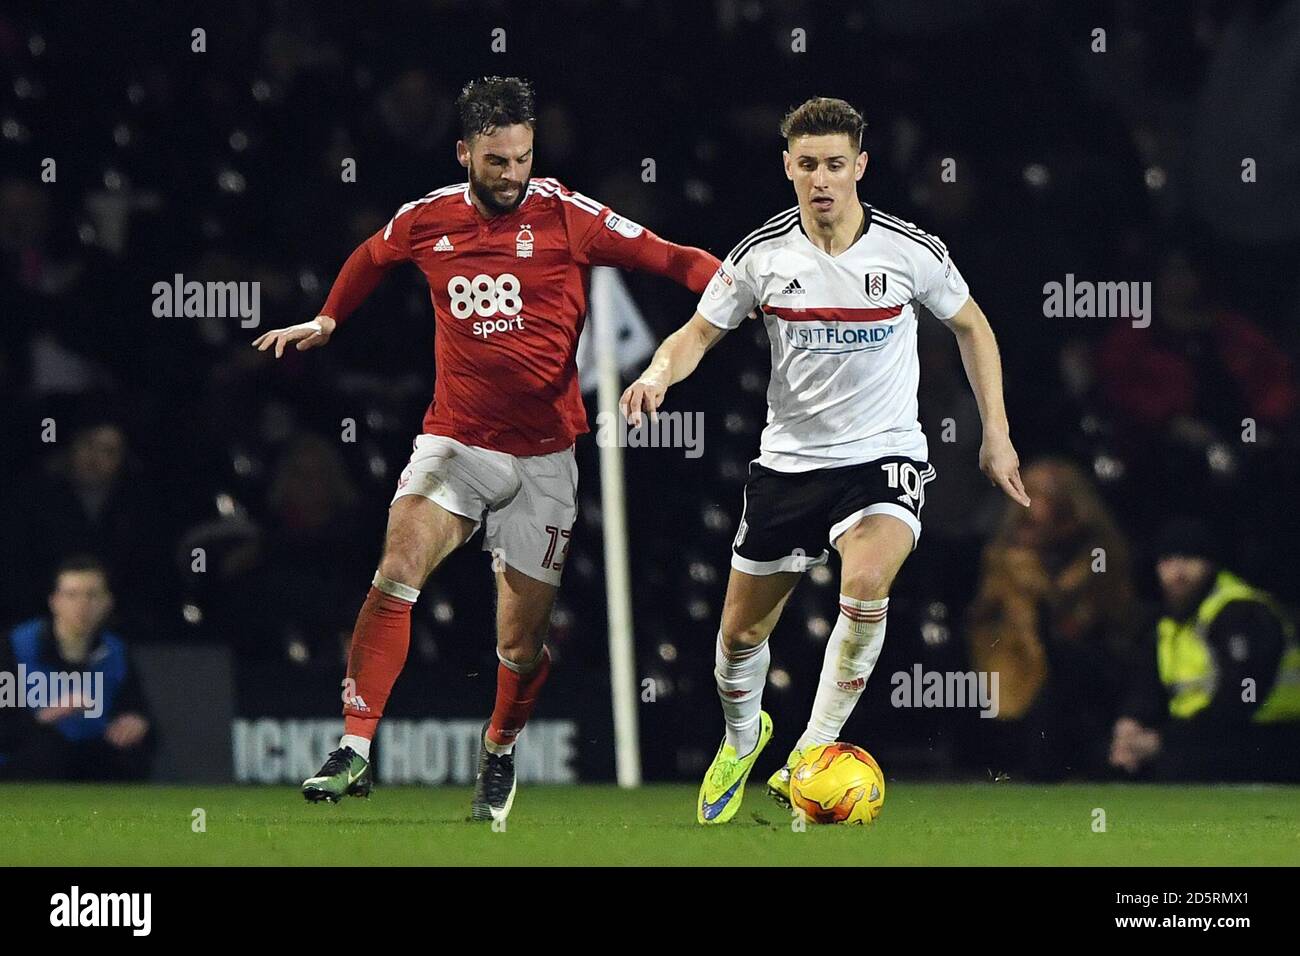 Nottingham Forest's Danny Fox (left) and Fulham's Tom Cairney (right) battle for the ball during the Sky Bet Championship match between Fulham and Nottingham Forest at Craven Cottage Stock Photo